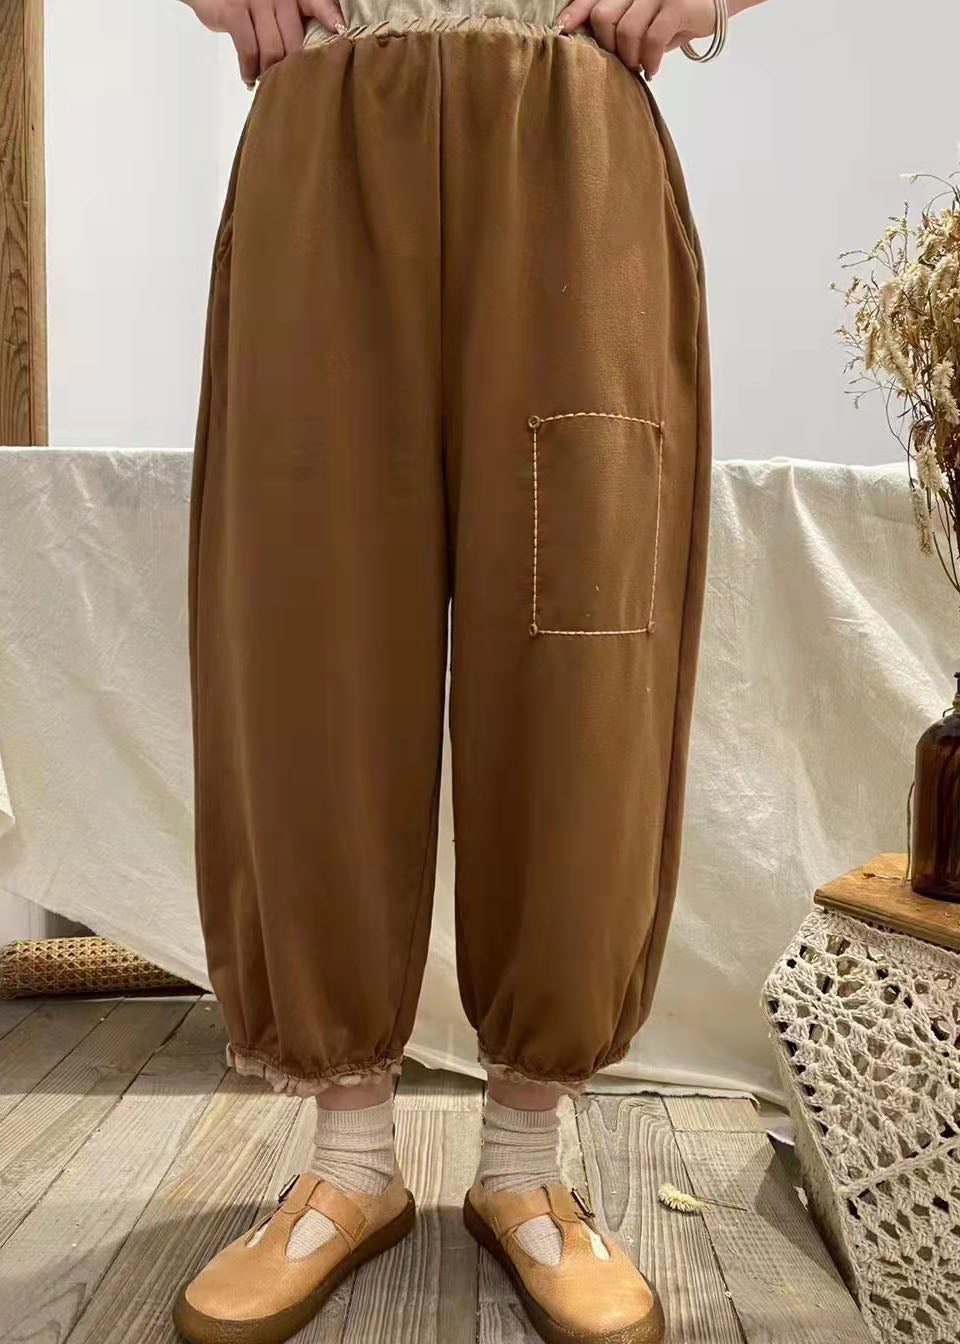 Modern Coffee Pockets Patchwork Cotton Pants Spring